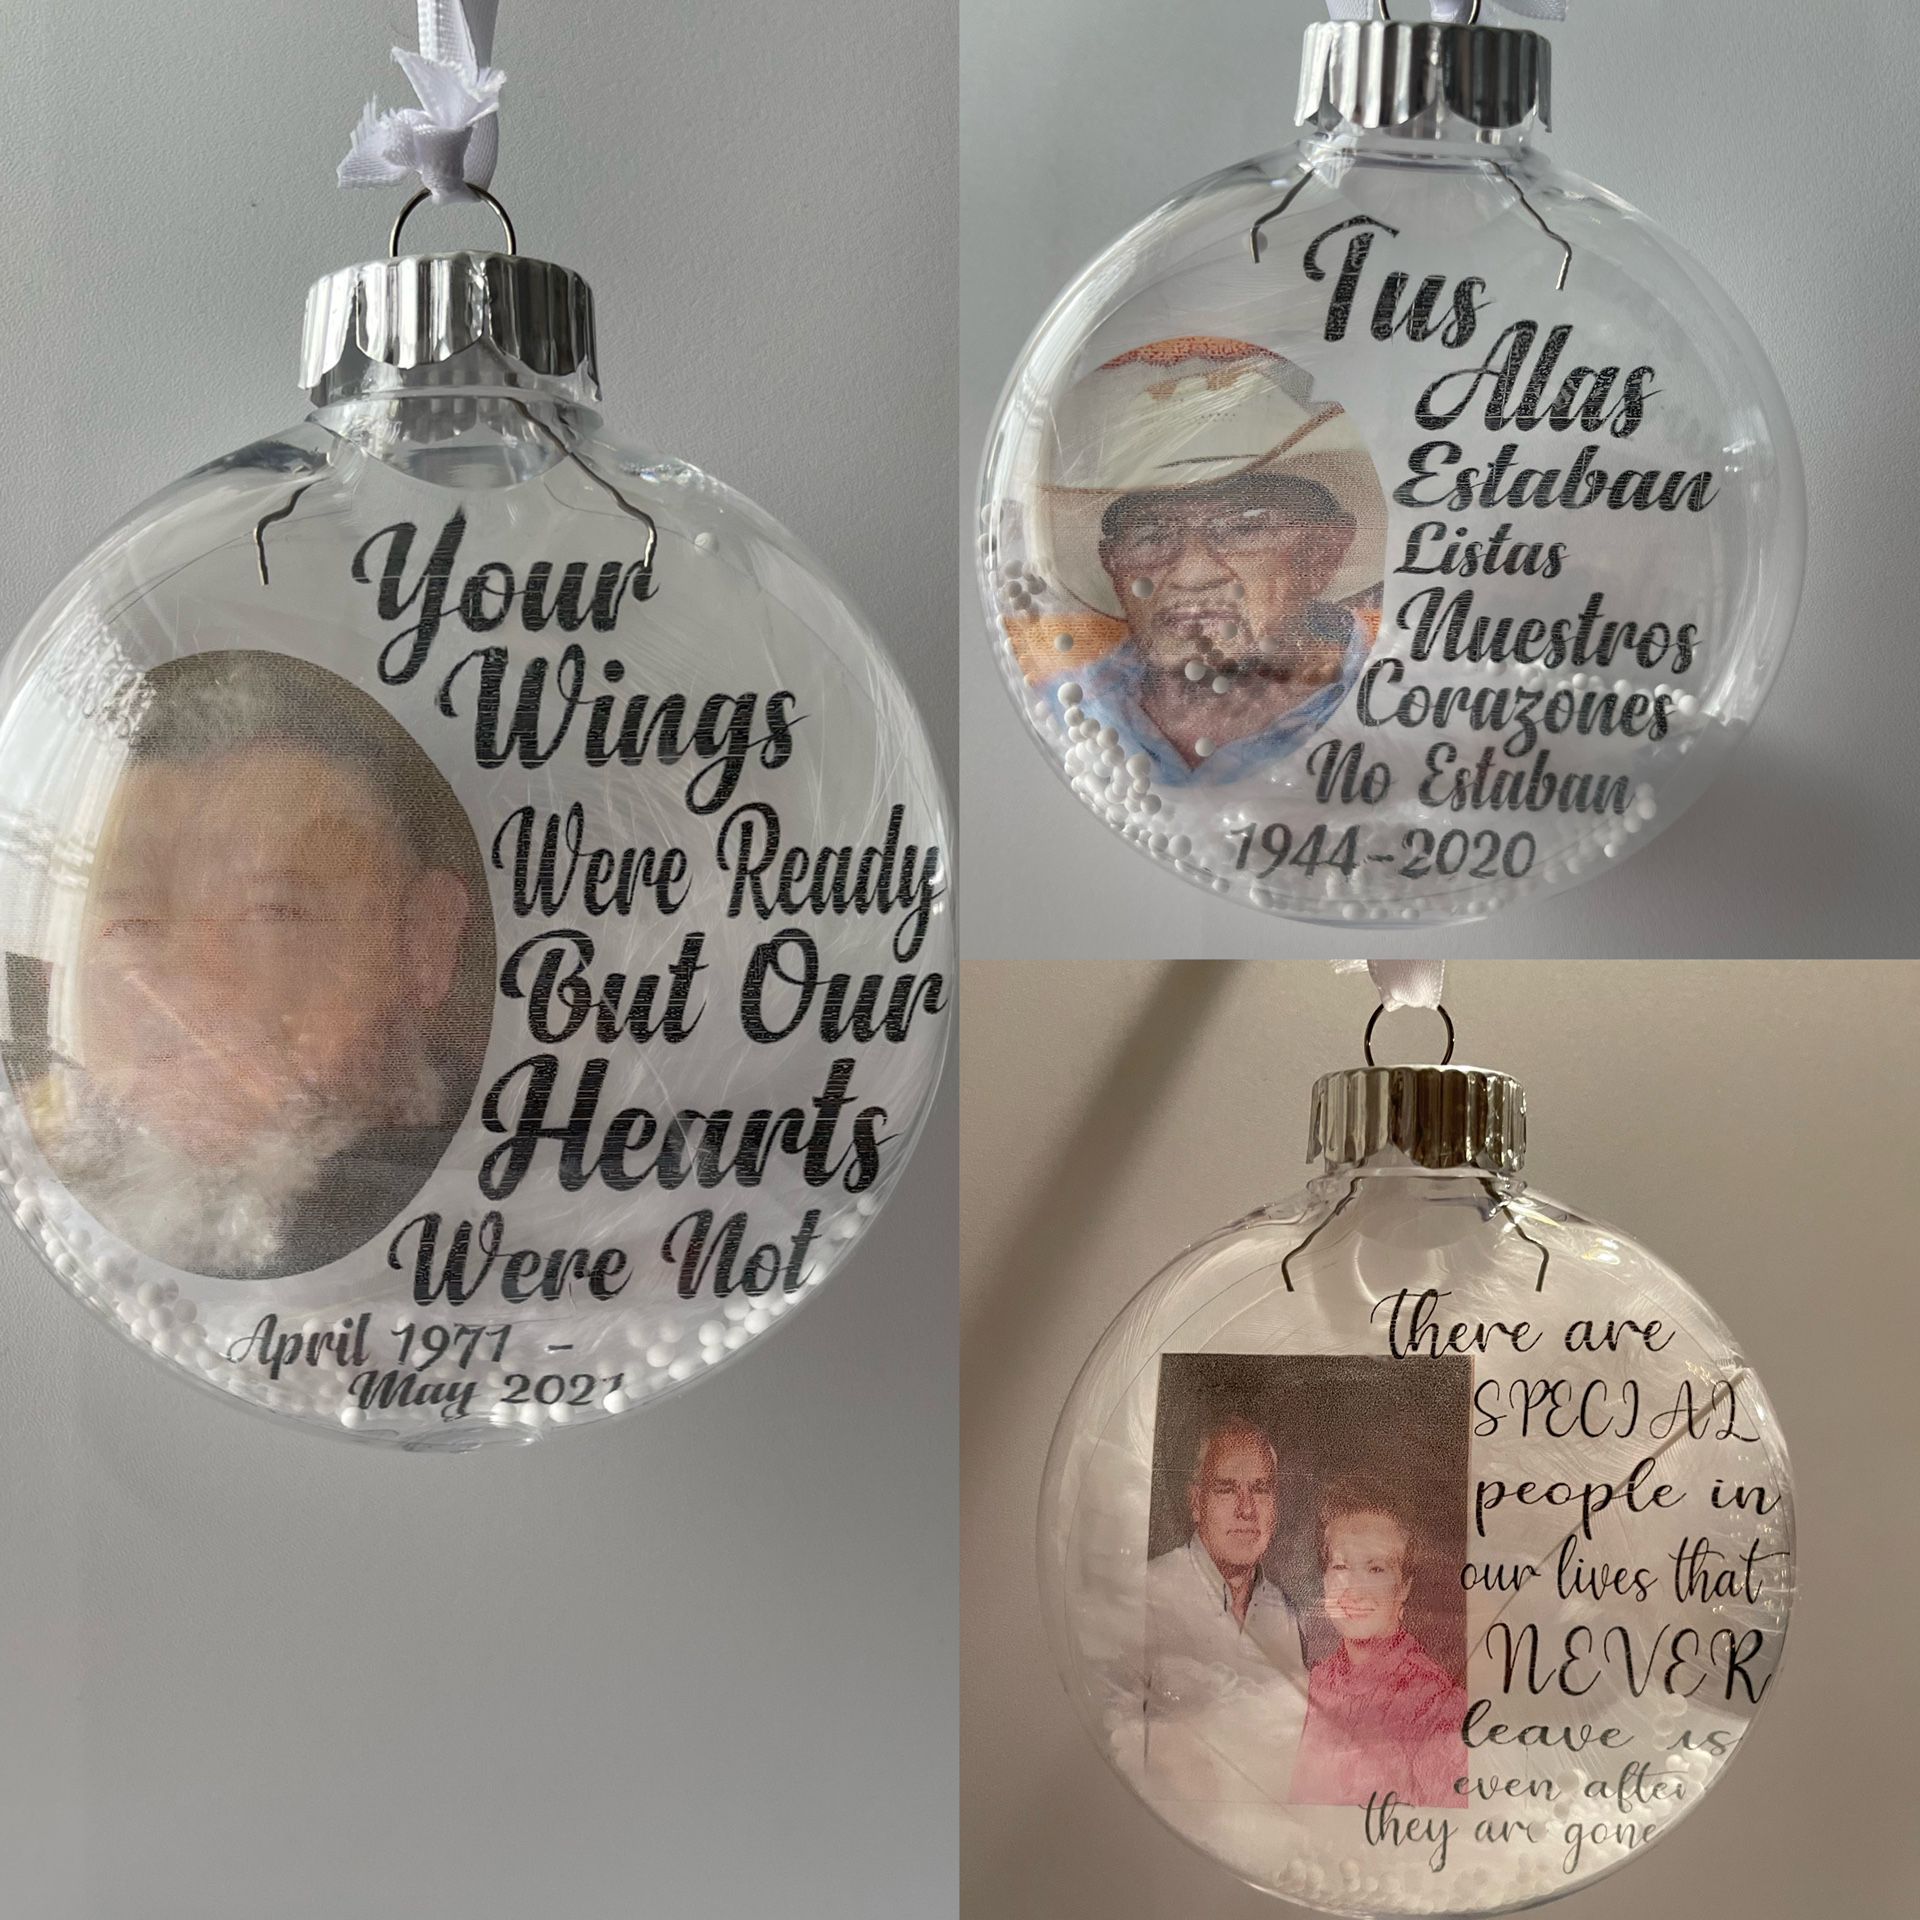 Personalized Ornaments 